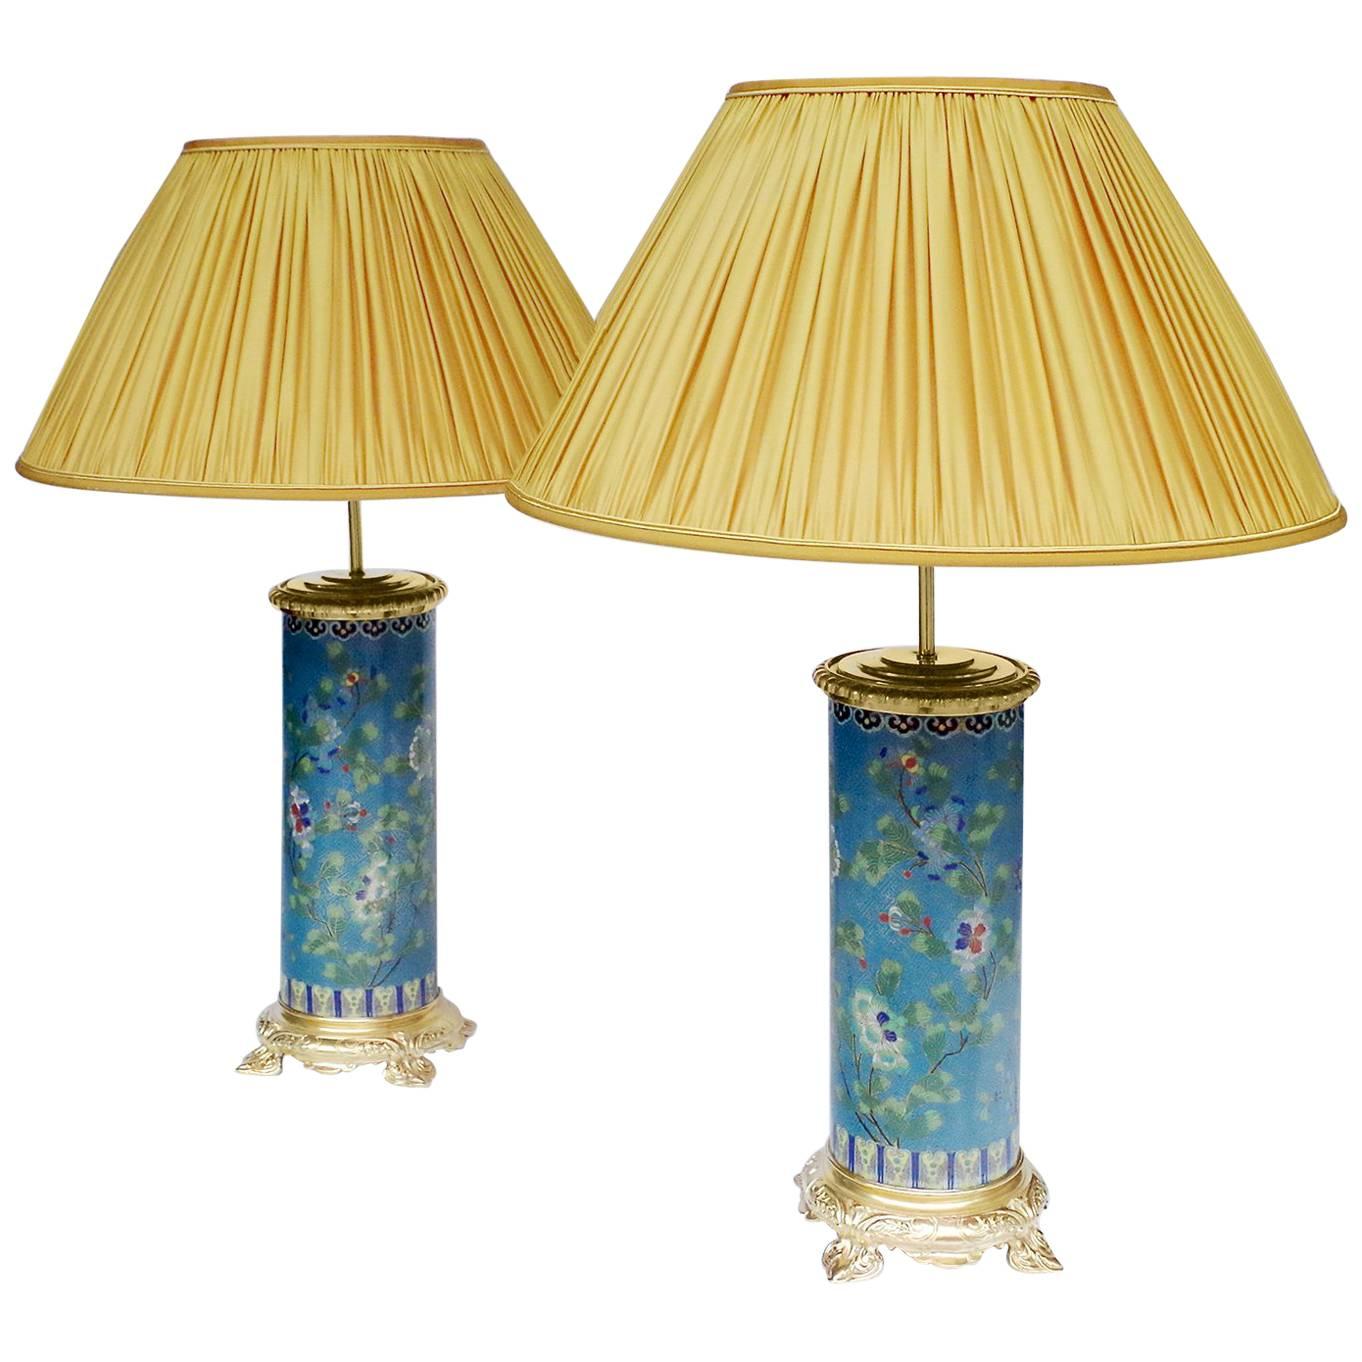 Pair of Cloisonne Enamel Lamps with Gilt Bronze Mounting, circa 1900